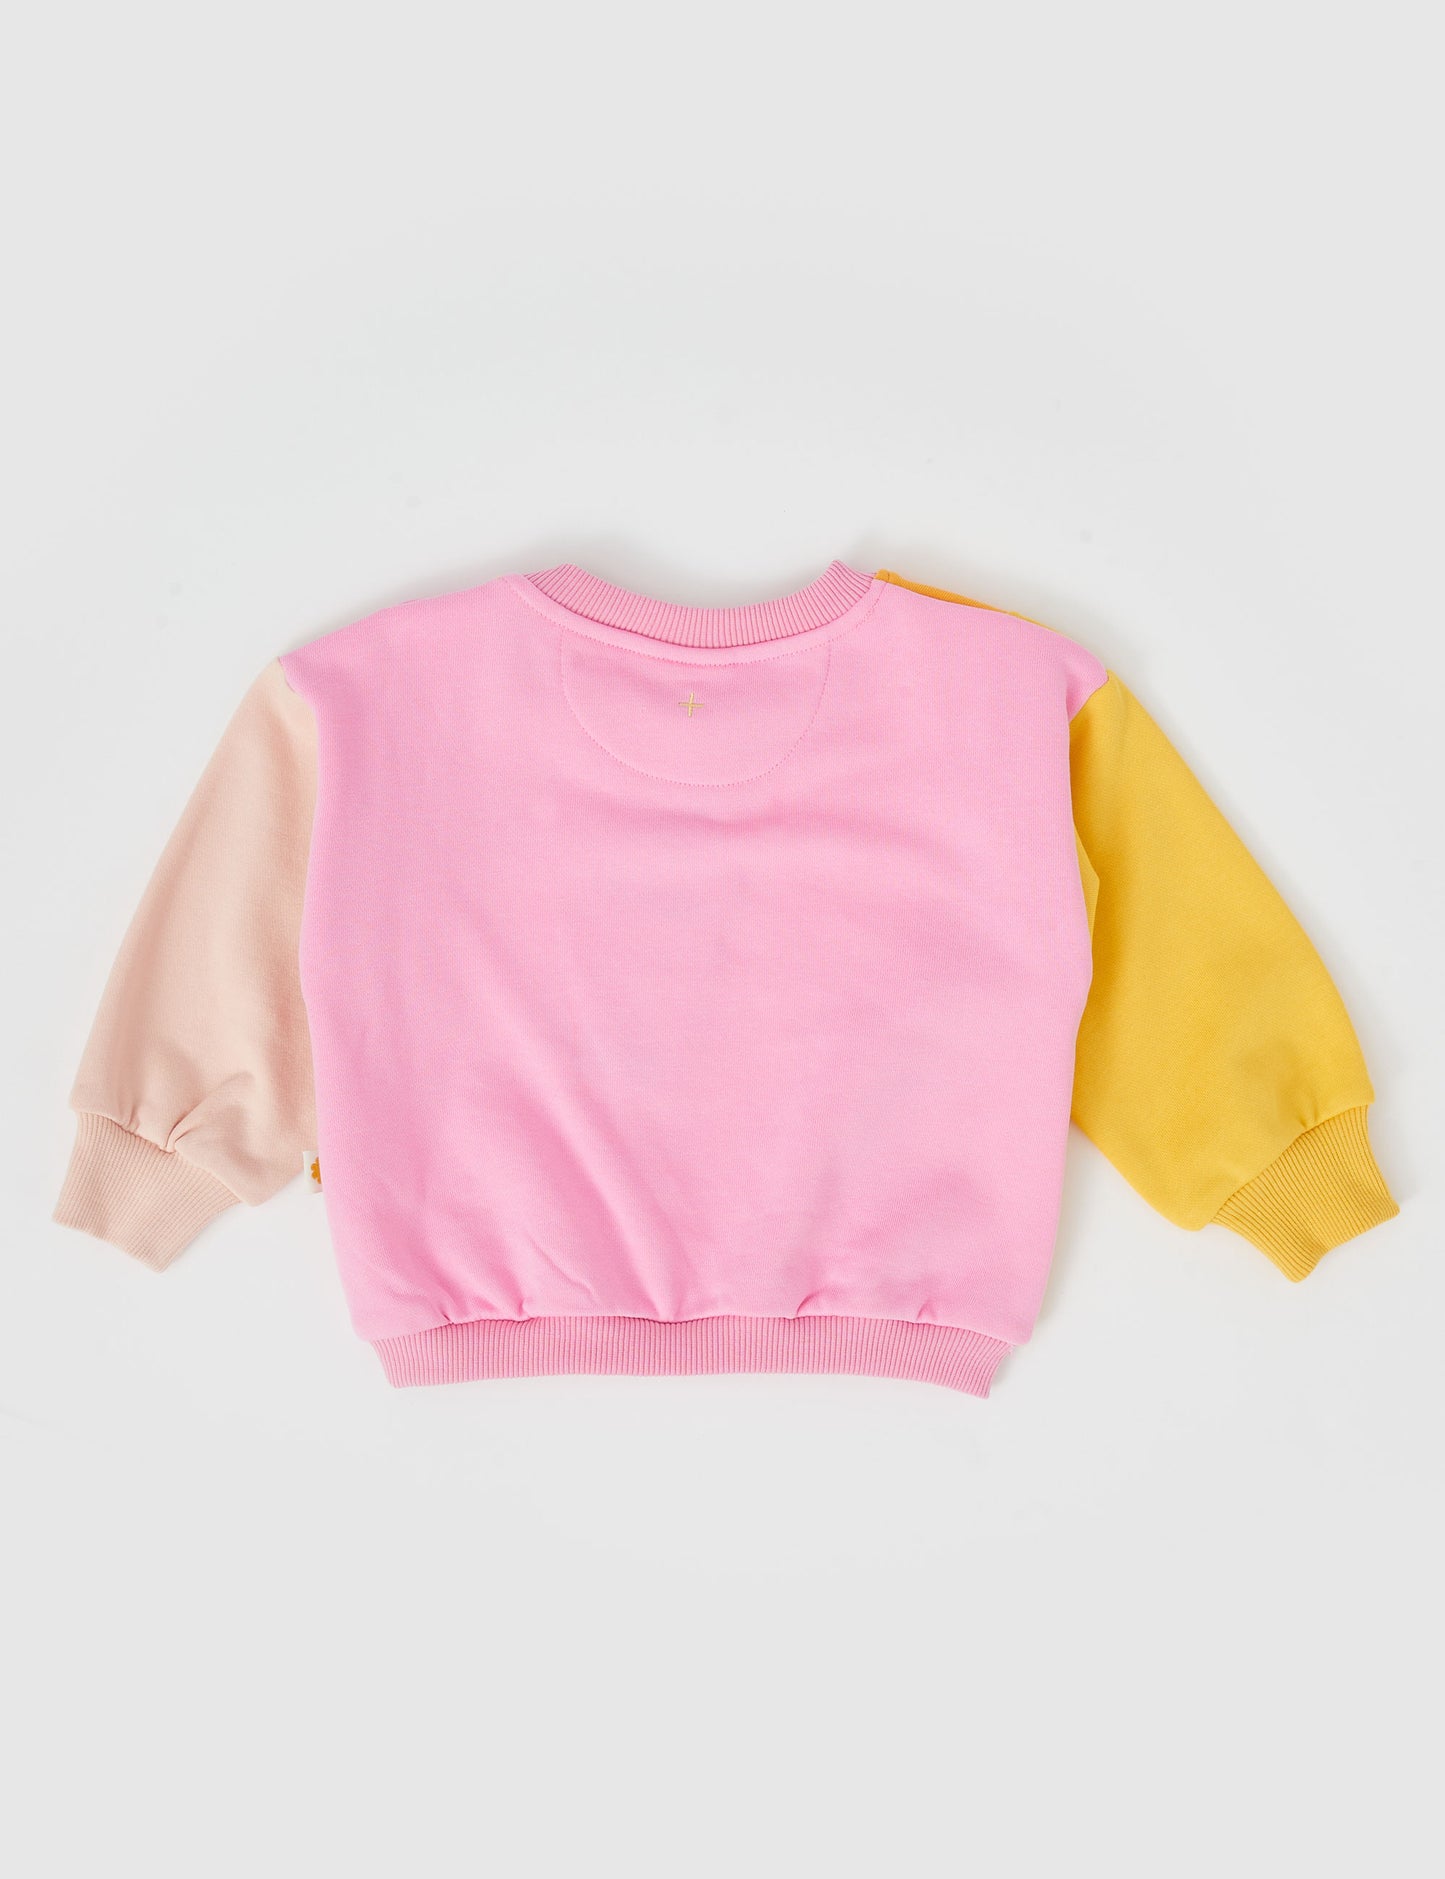 Goldie + Ace Rio Wave Sweater Pink Gold Multi